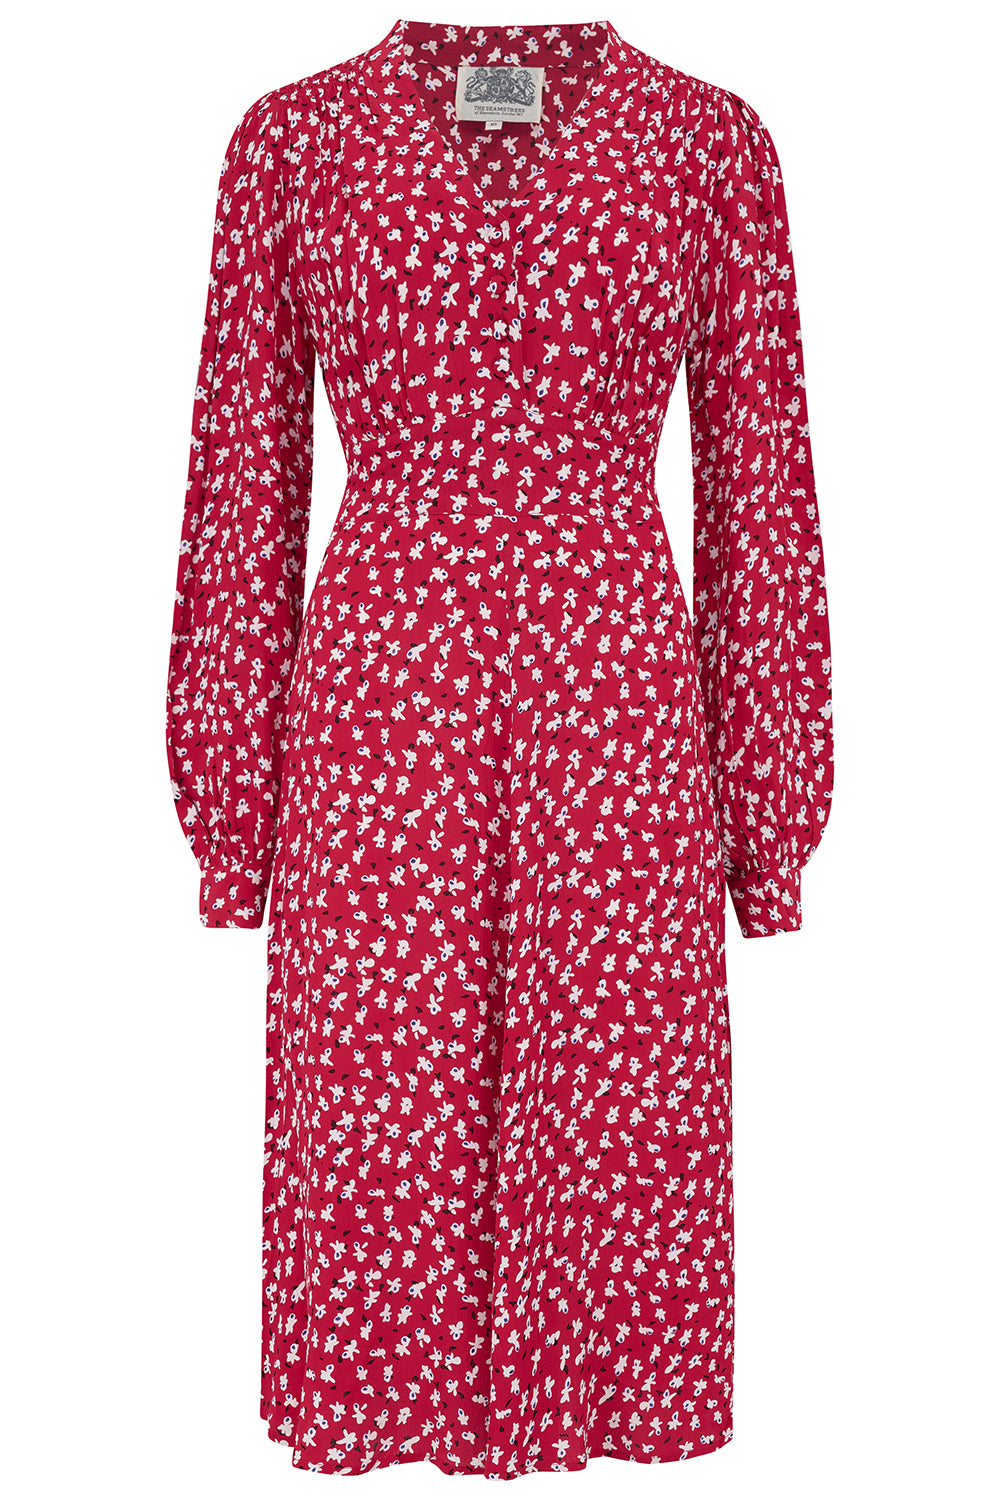 "Ava" Dress in Red Clove Print, Classic 1940's Style Long Sleeve Dress - True and authentic vintage style clothing, inspired by the Classic styles of CC41 , WW2 and the fun 1950s RocknRoll era, for everyday wear plus events like Goodwood Revival, Twinwood Festival and Viva Las Vegas Rockabilly Weekend Rock n Romance The Seamstress Of Bloomsbury